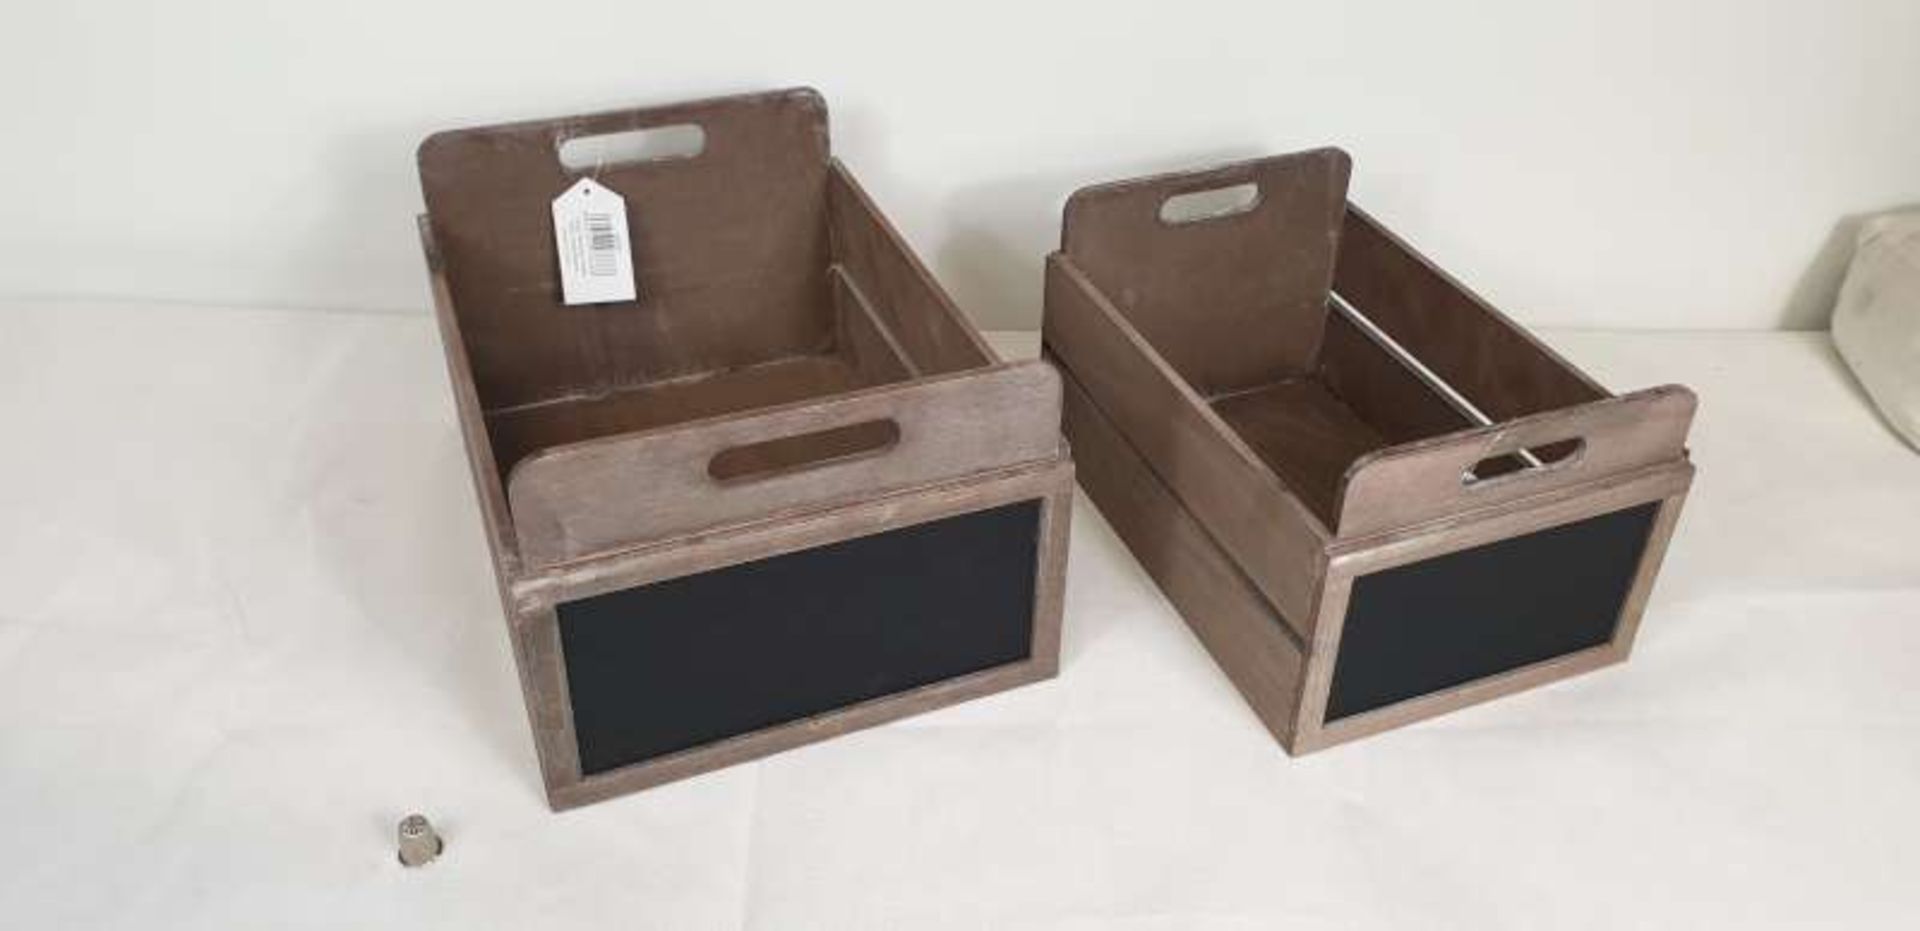 10 X BRAND SETS OF 2 WOODEN CRATES WITH CHALKBOARD IN 10 BOXES